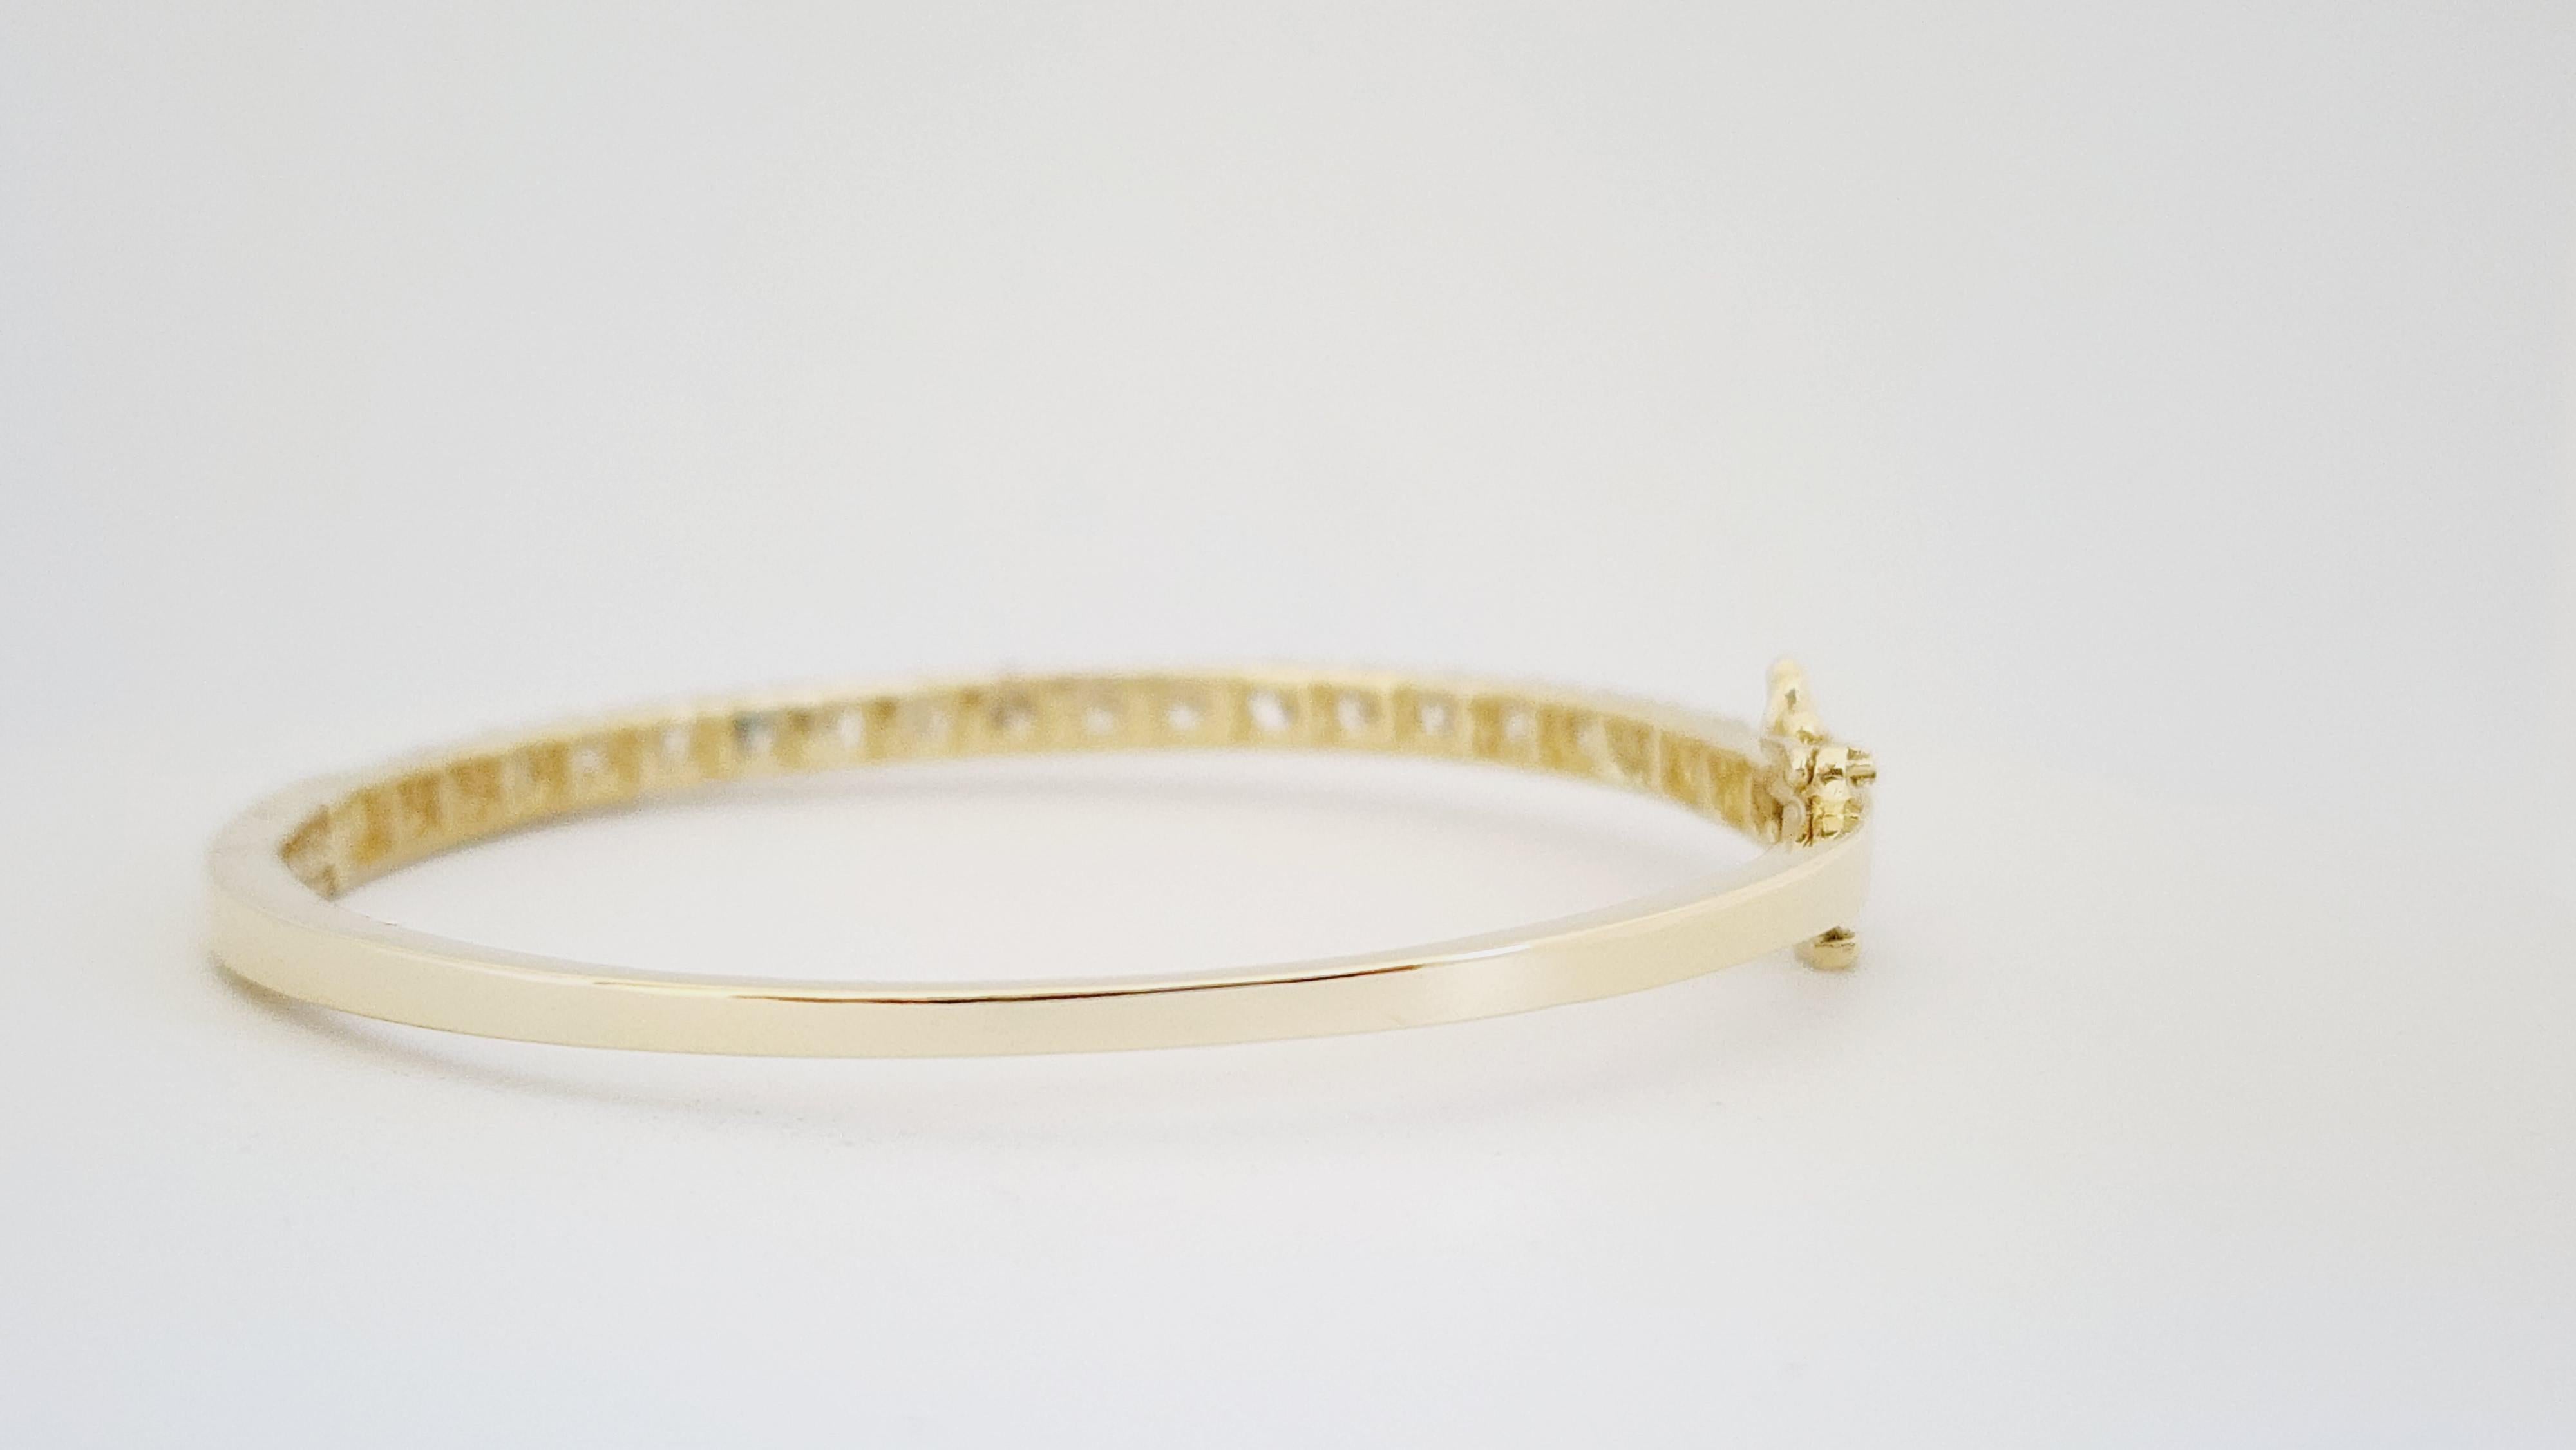 3.88 Carat Flexible Bangle Yellow Gold 14 Karat Bracelet In New Condition For Sale In Great Neck, NY